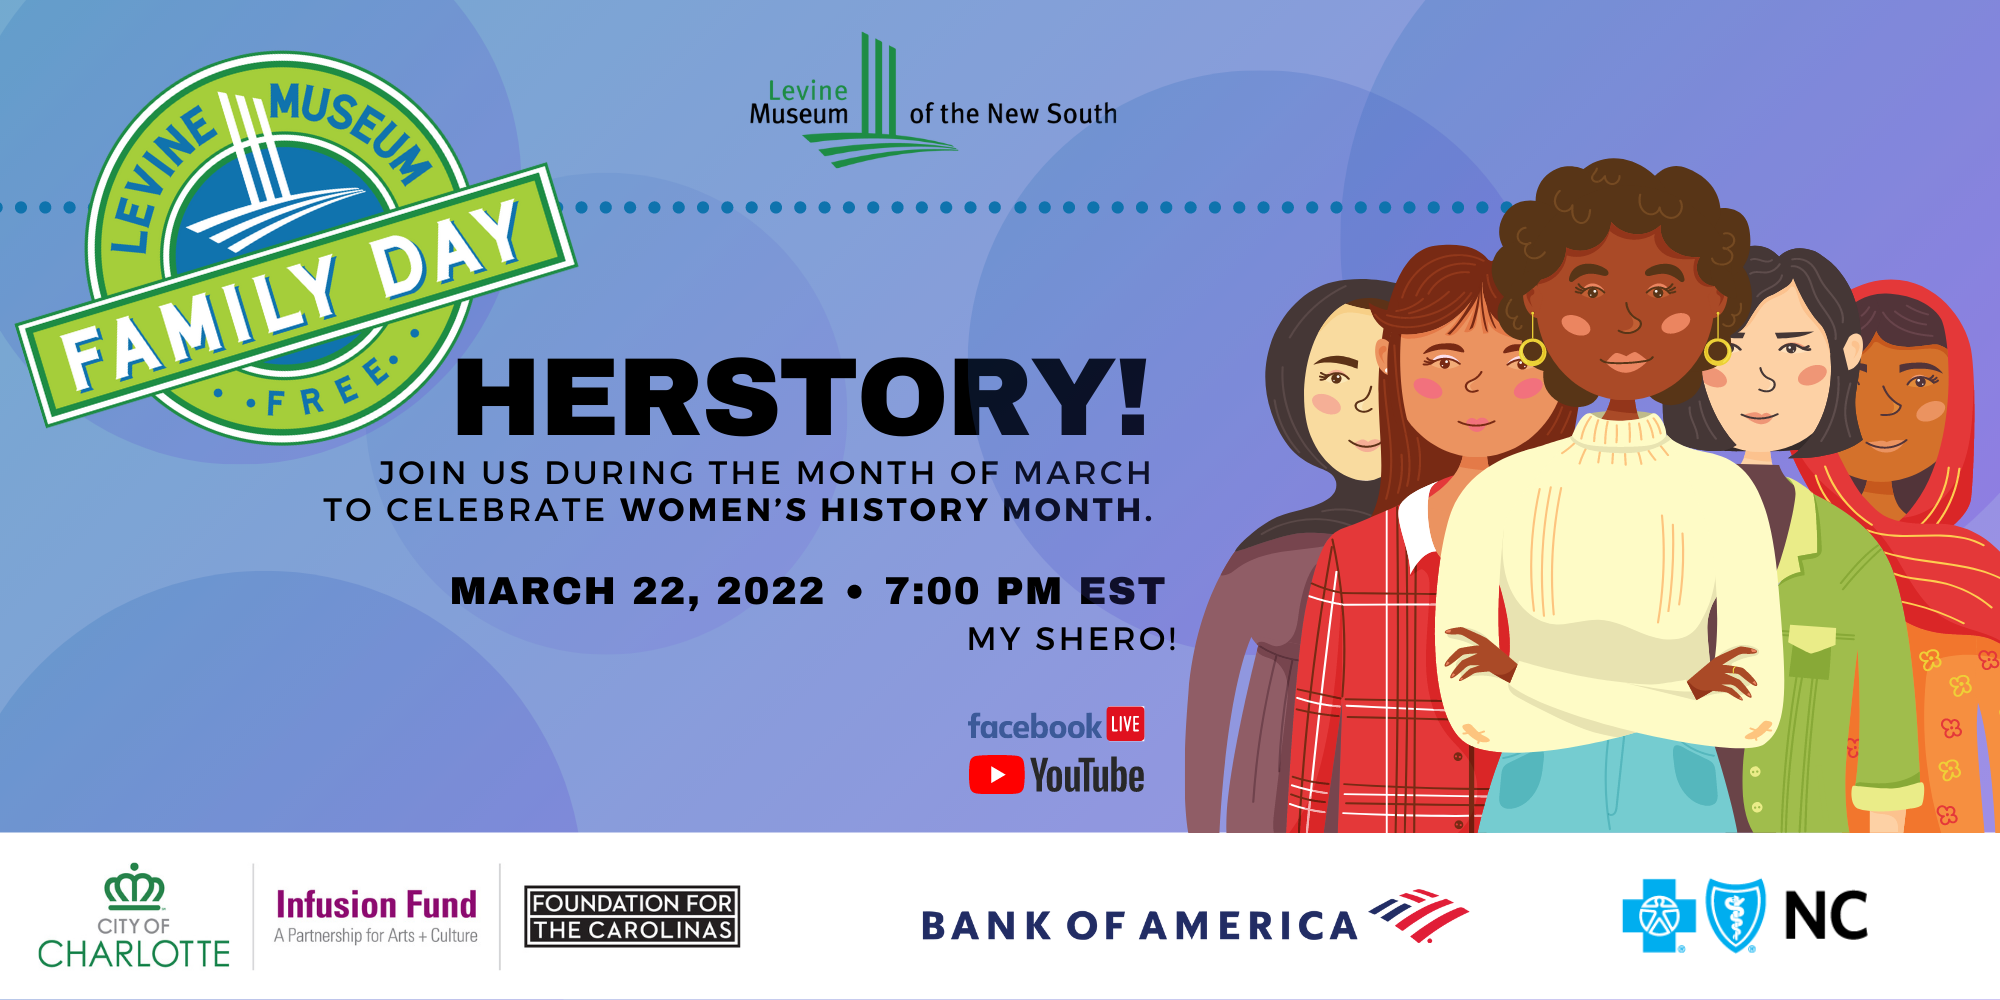 Levine Museum of the New South HERstory: Virtual Family Day Celebration My Shero Event Image